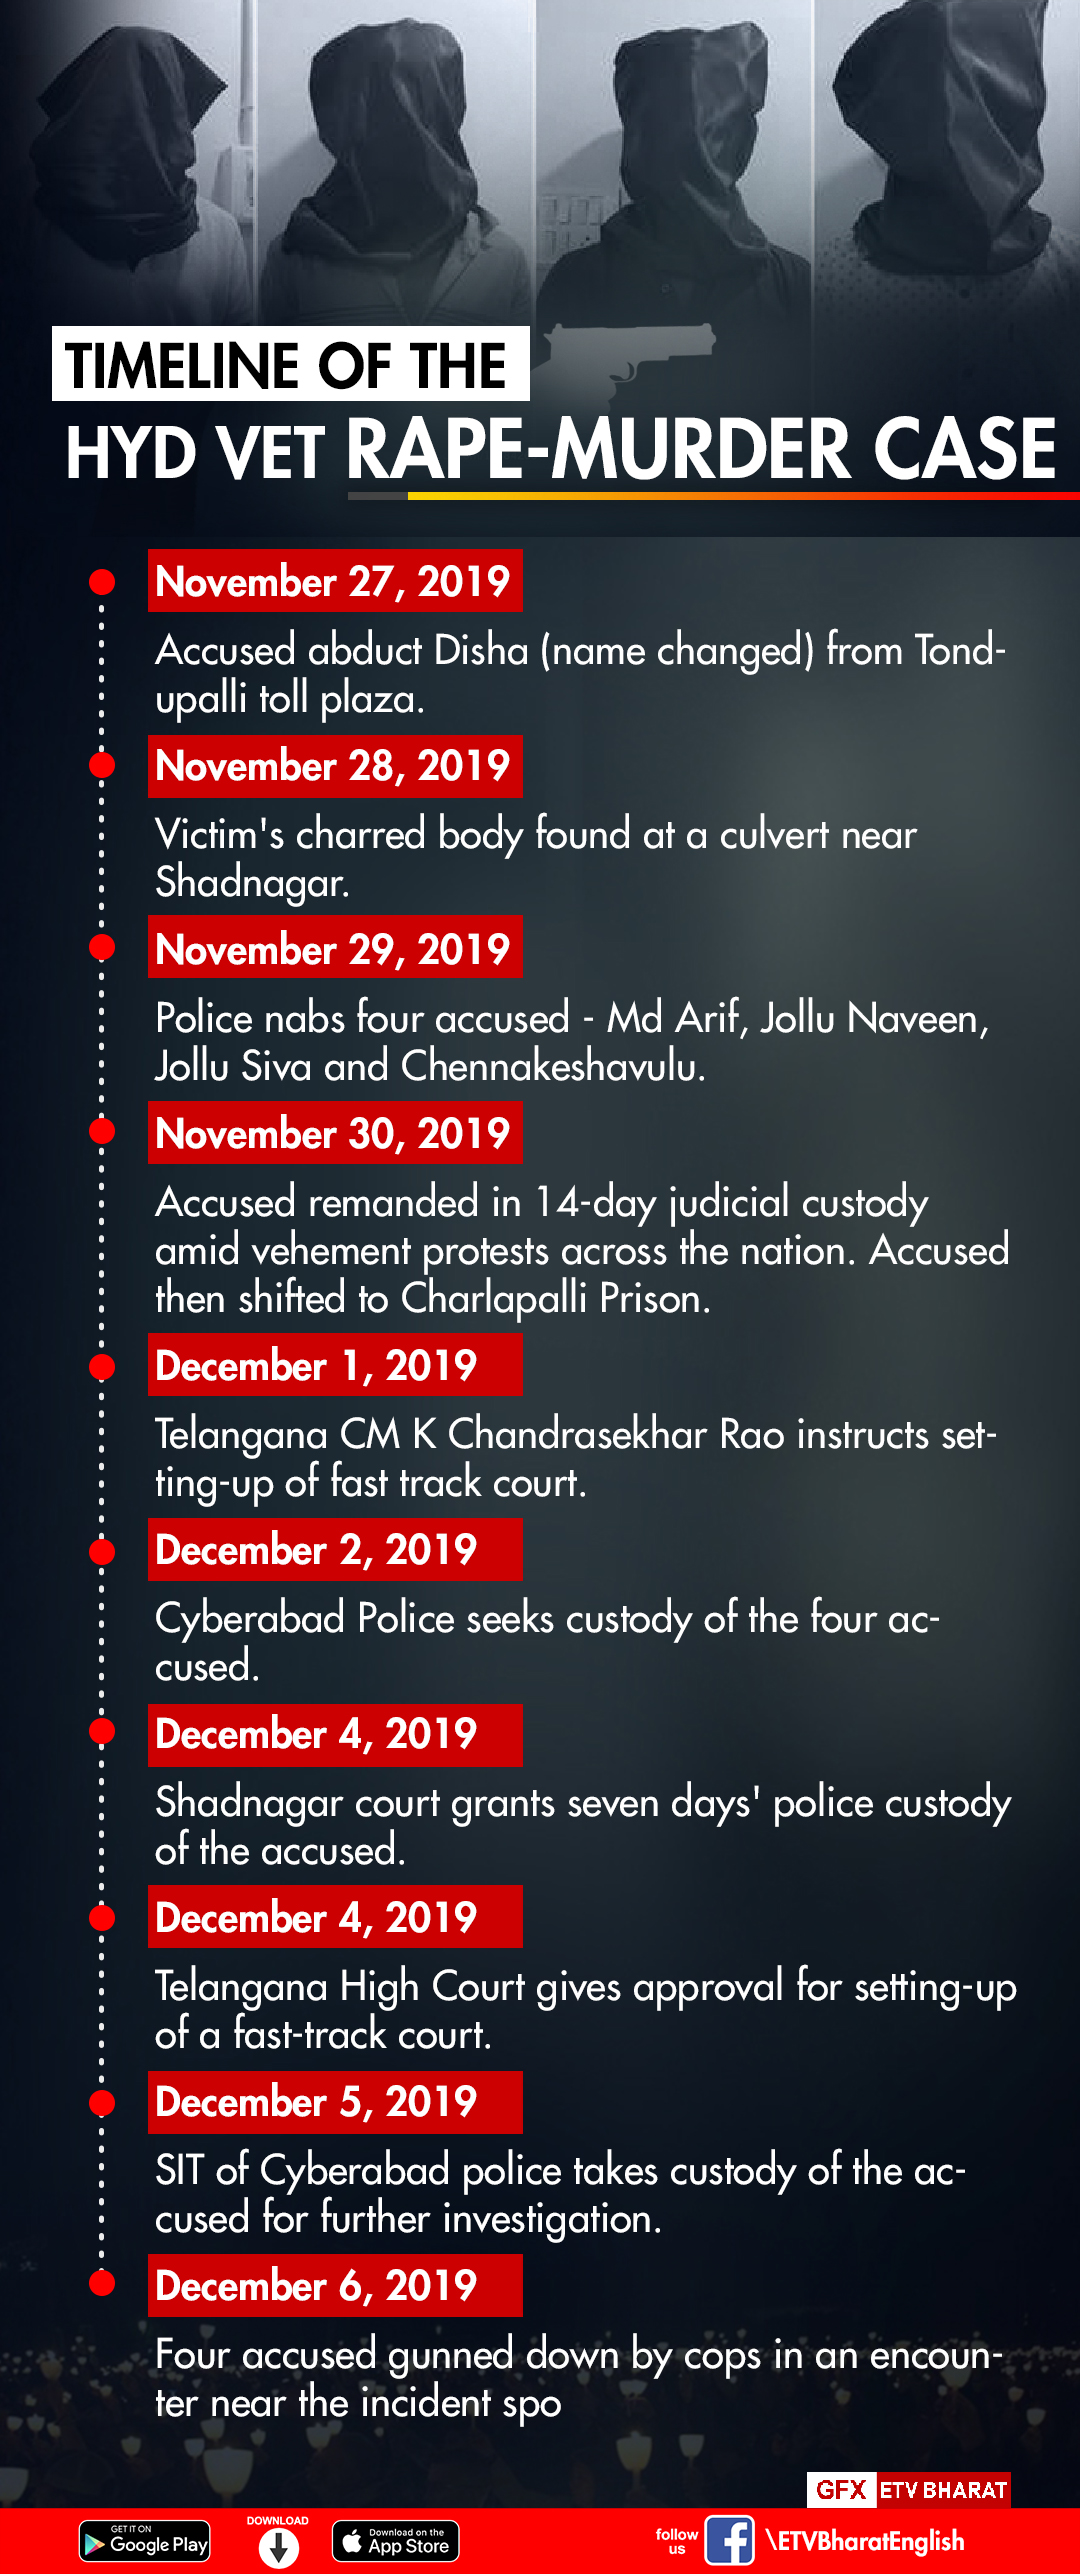 Chronology of the case